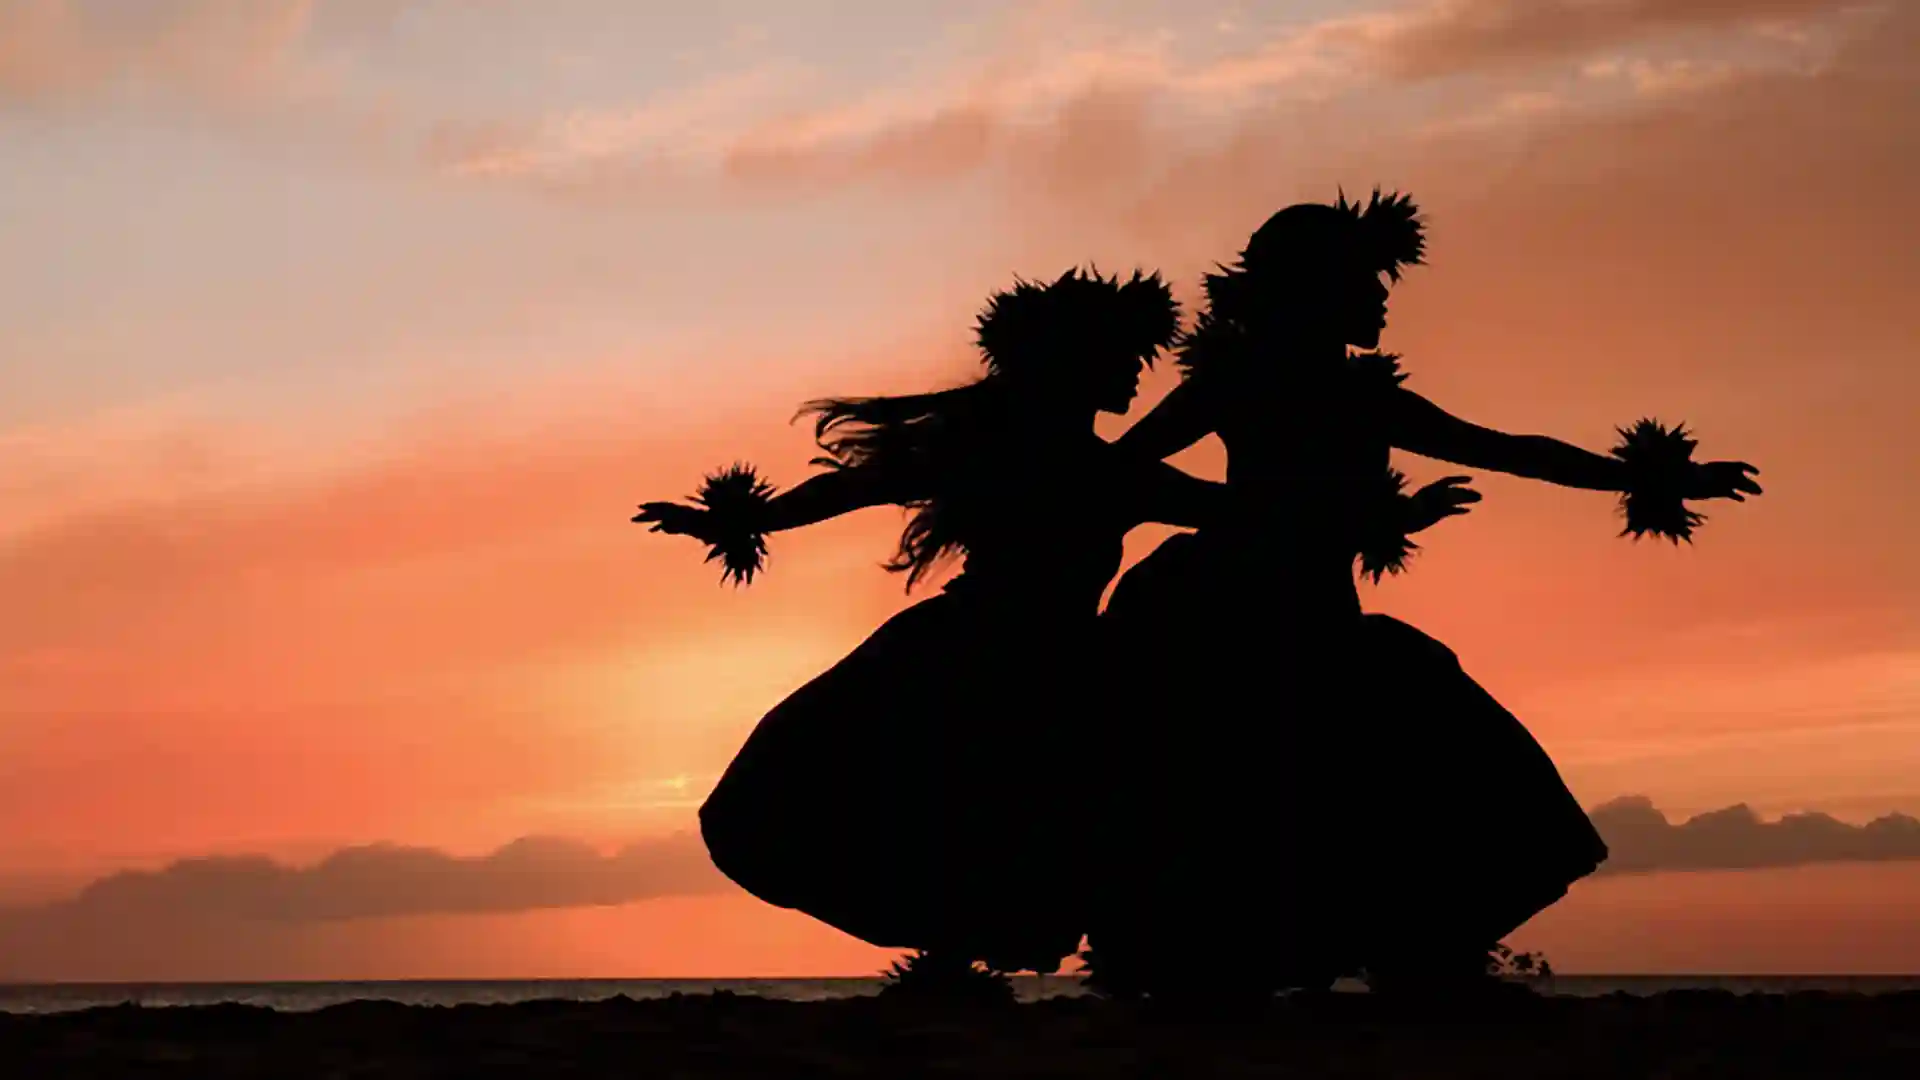 View of hula dancers at sunset on beach in Hawaii.